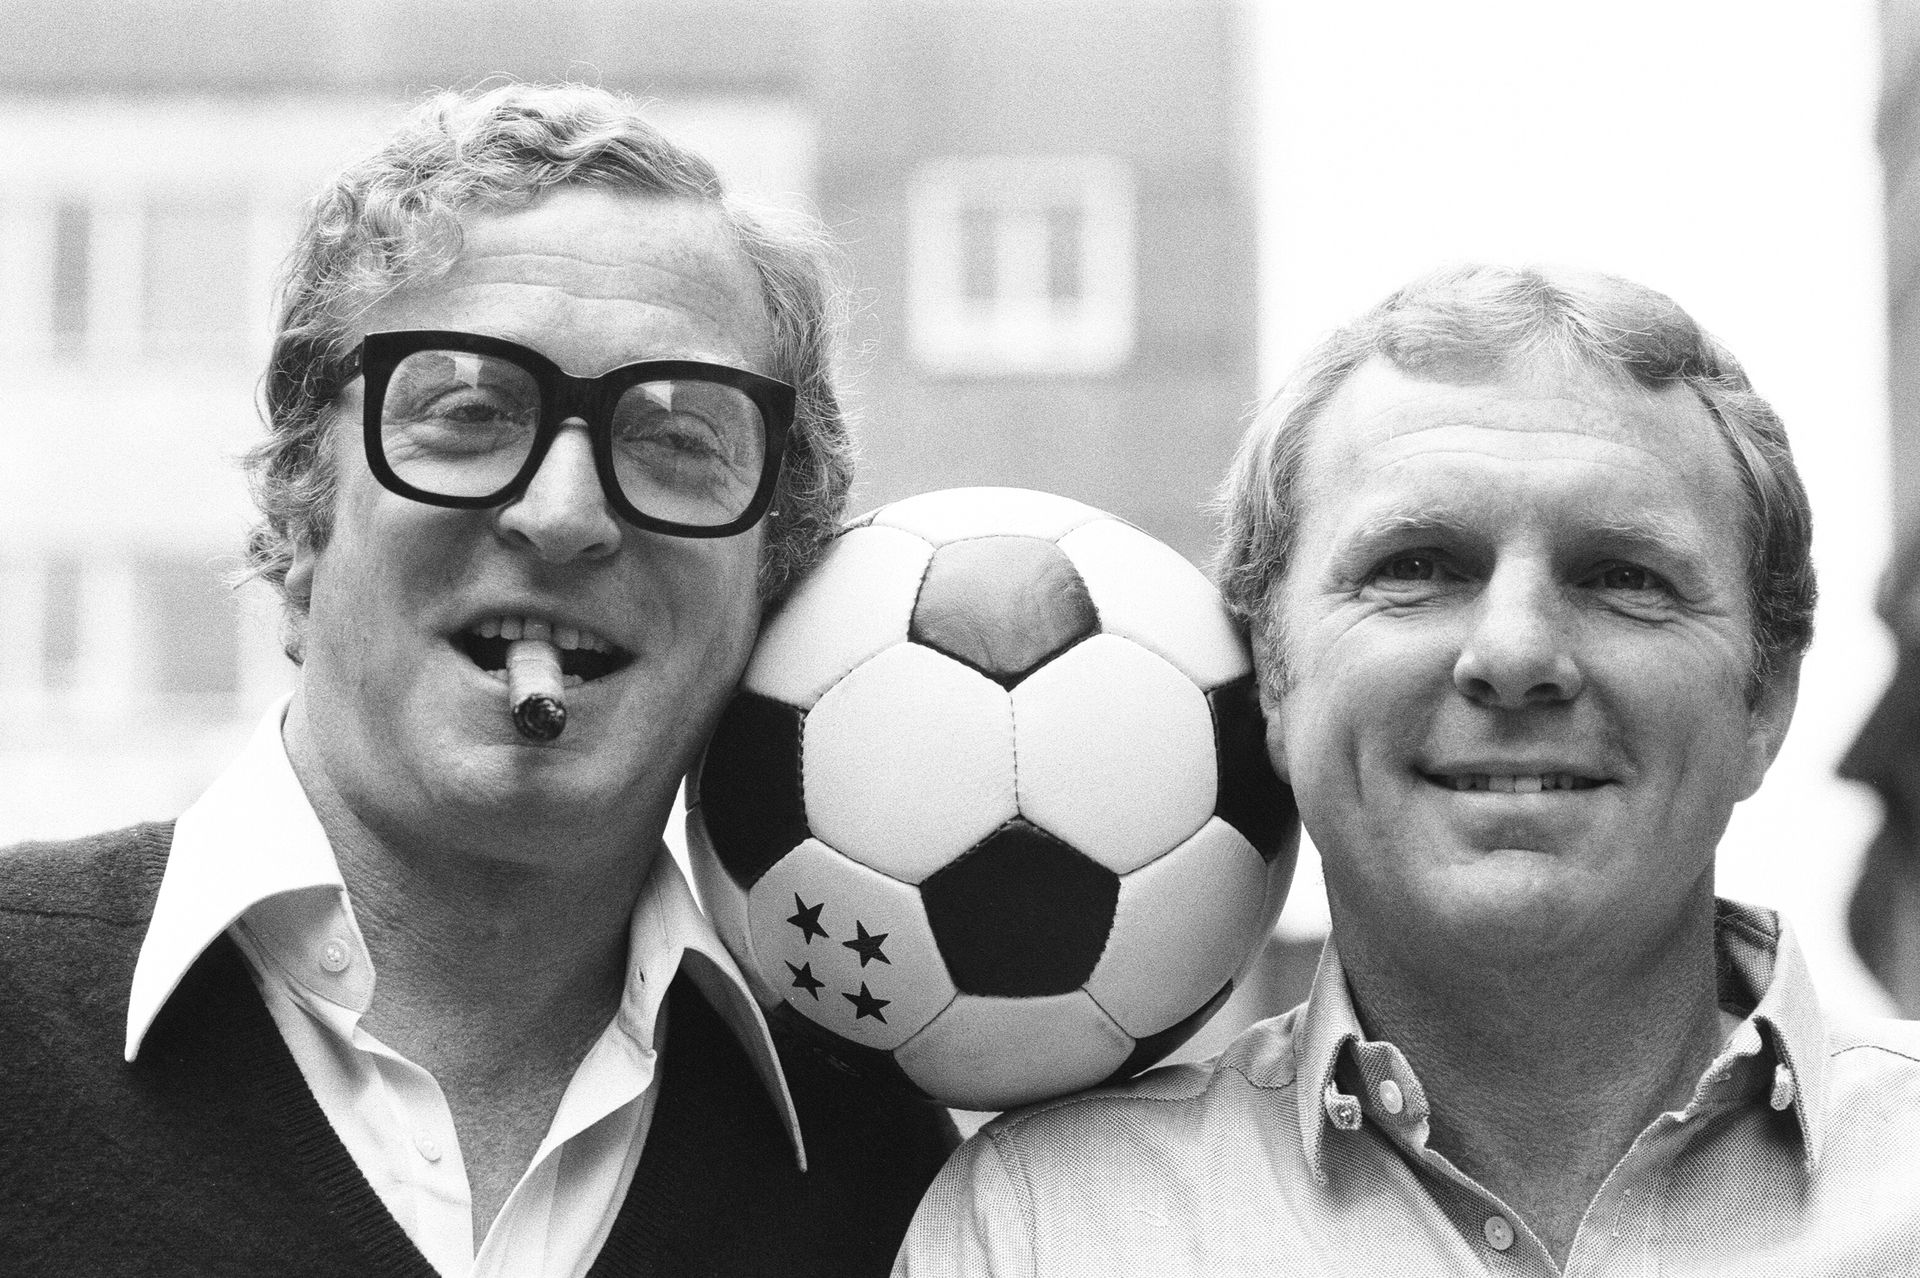 <p>                     Michael Caine famously starred alongside illustrious former footballers including Pele, Bobby Moore and Osvaldo Ardiles in the 1981 film Escape to Victory.                   </p>                                      <p>                     But in real life, the legendary actor is a Chelsea fan and likes to watch the Blues on his "big high def" television. He also occasionally posts about the club on Twitter.                   </p>